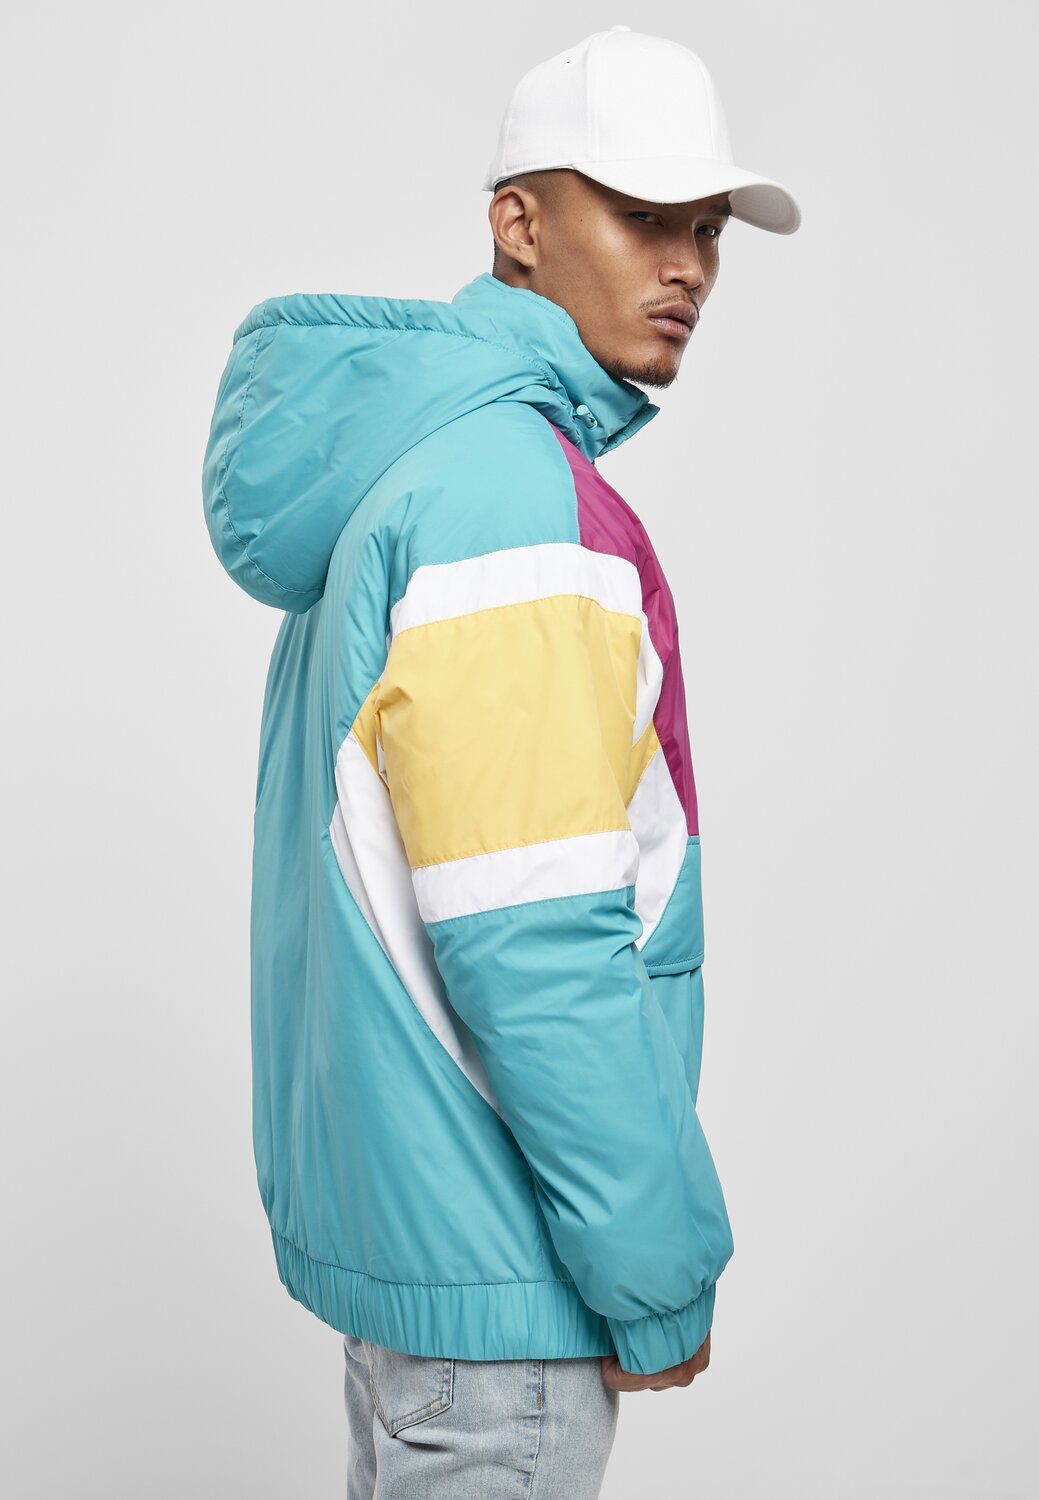 Starter jacket turquoise blue/pink/yellow/white | MAXISCOOT